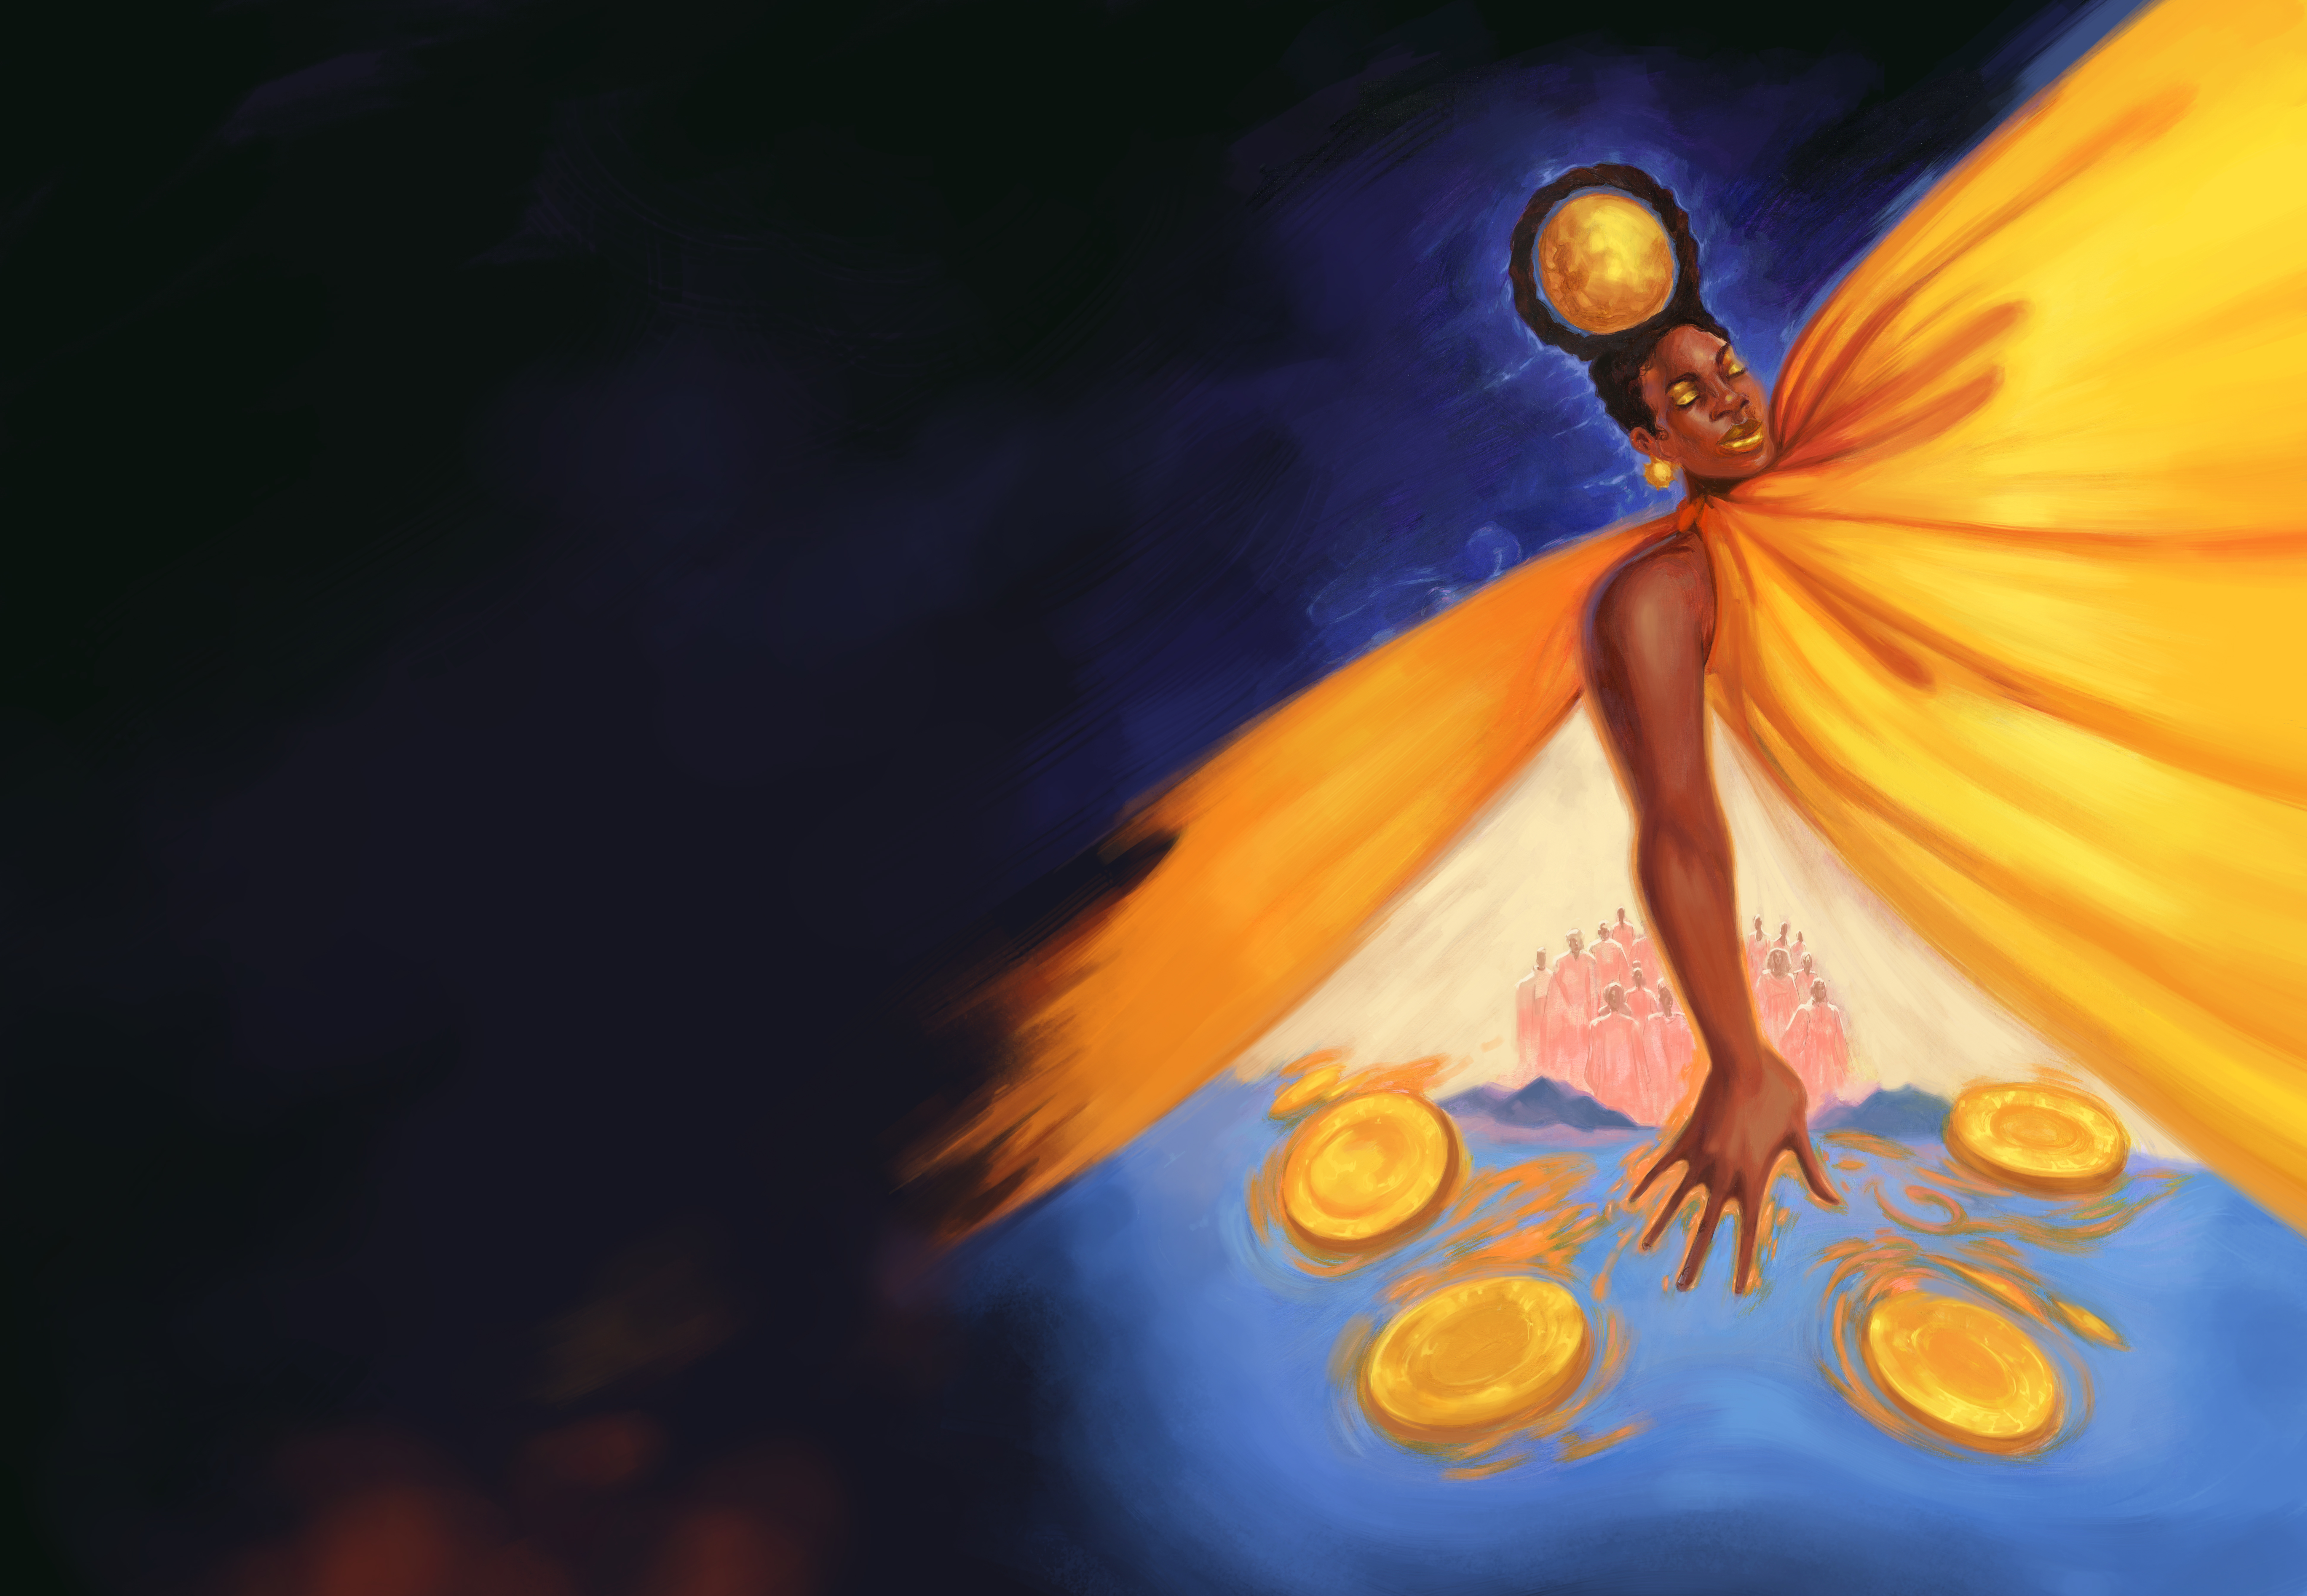 Illustration of a Black woman in a flowing yellow dress with coins by her hands.